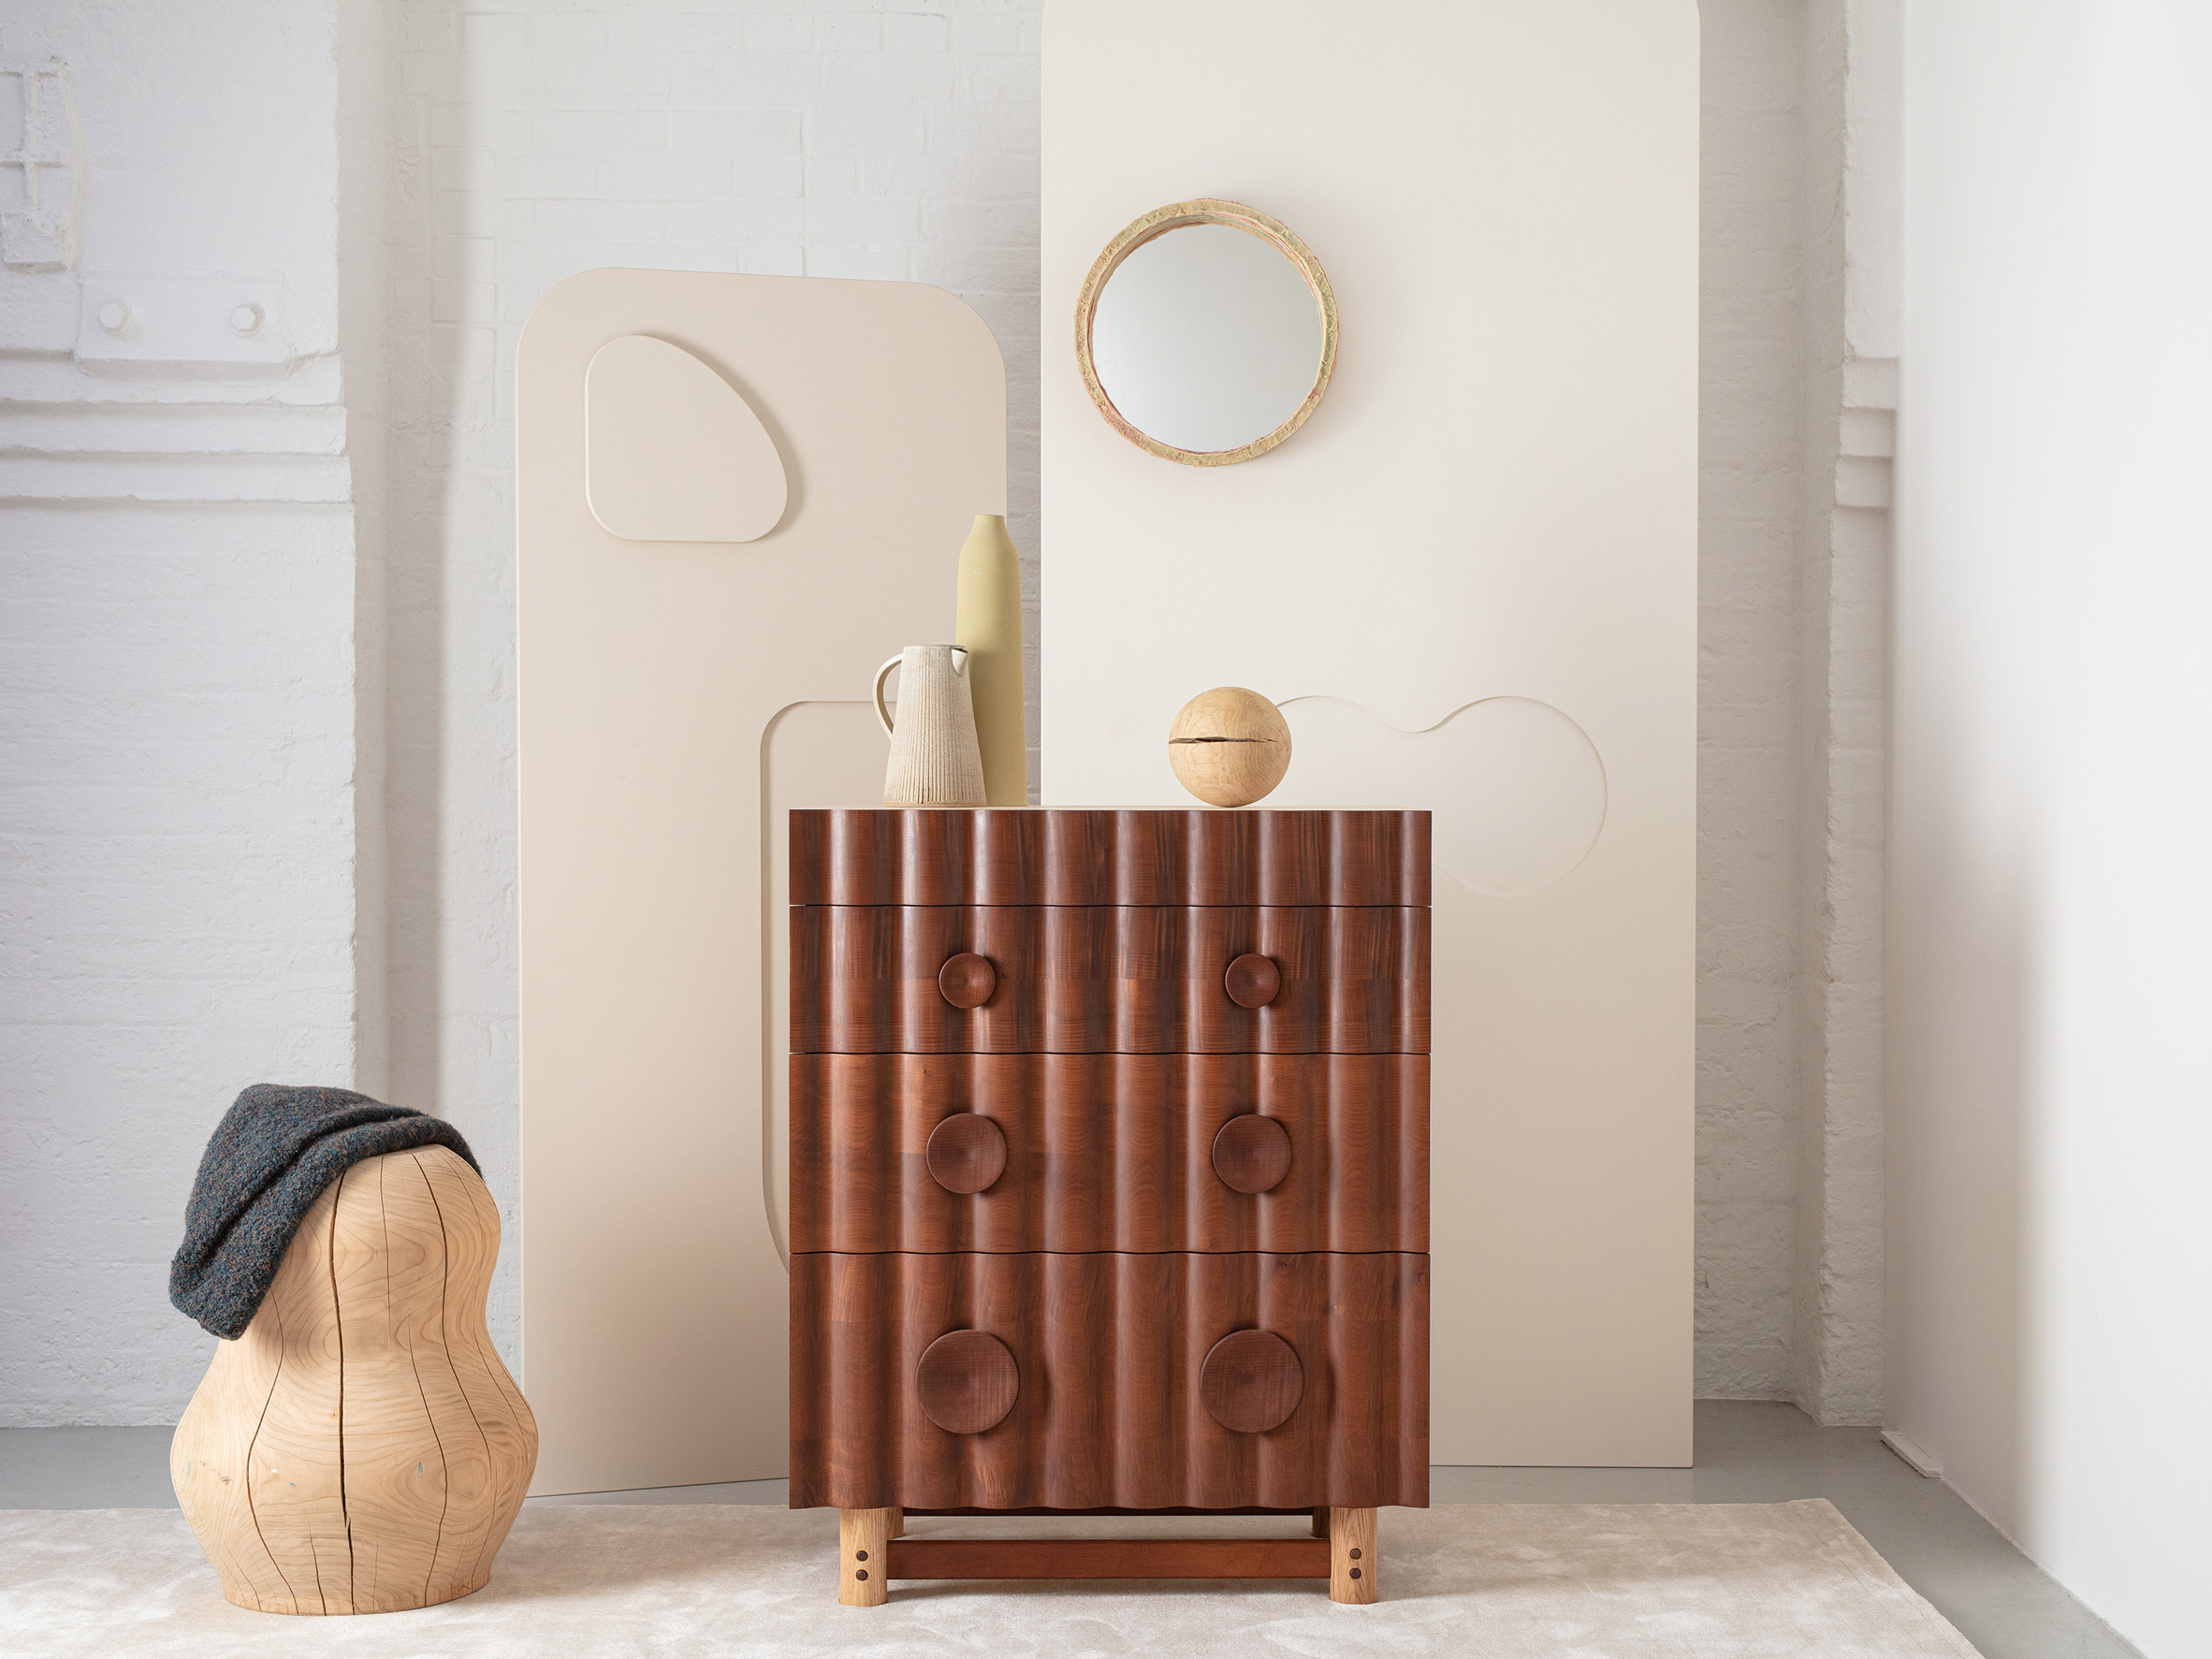 The chest of drawers from the Jan Hendzel Studio Bowater collection made using British hardwood